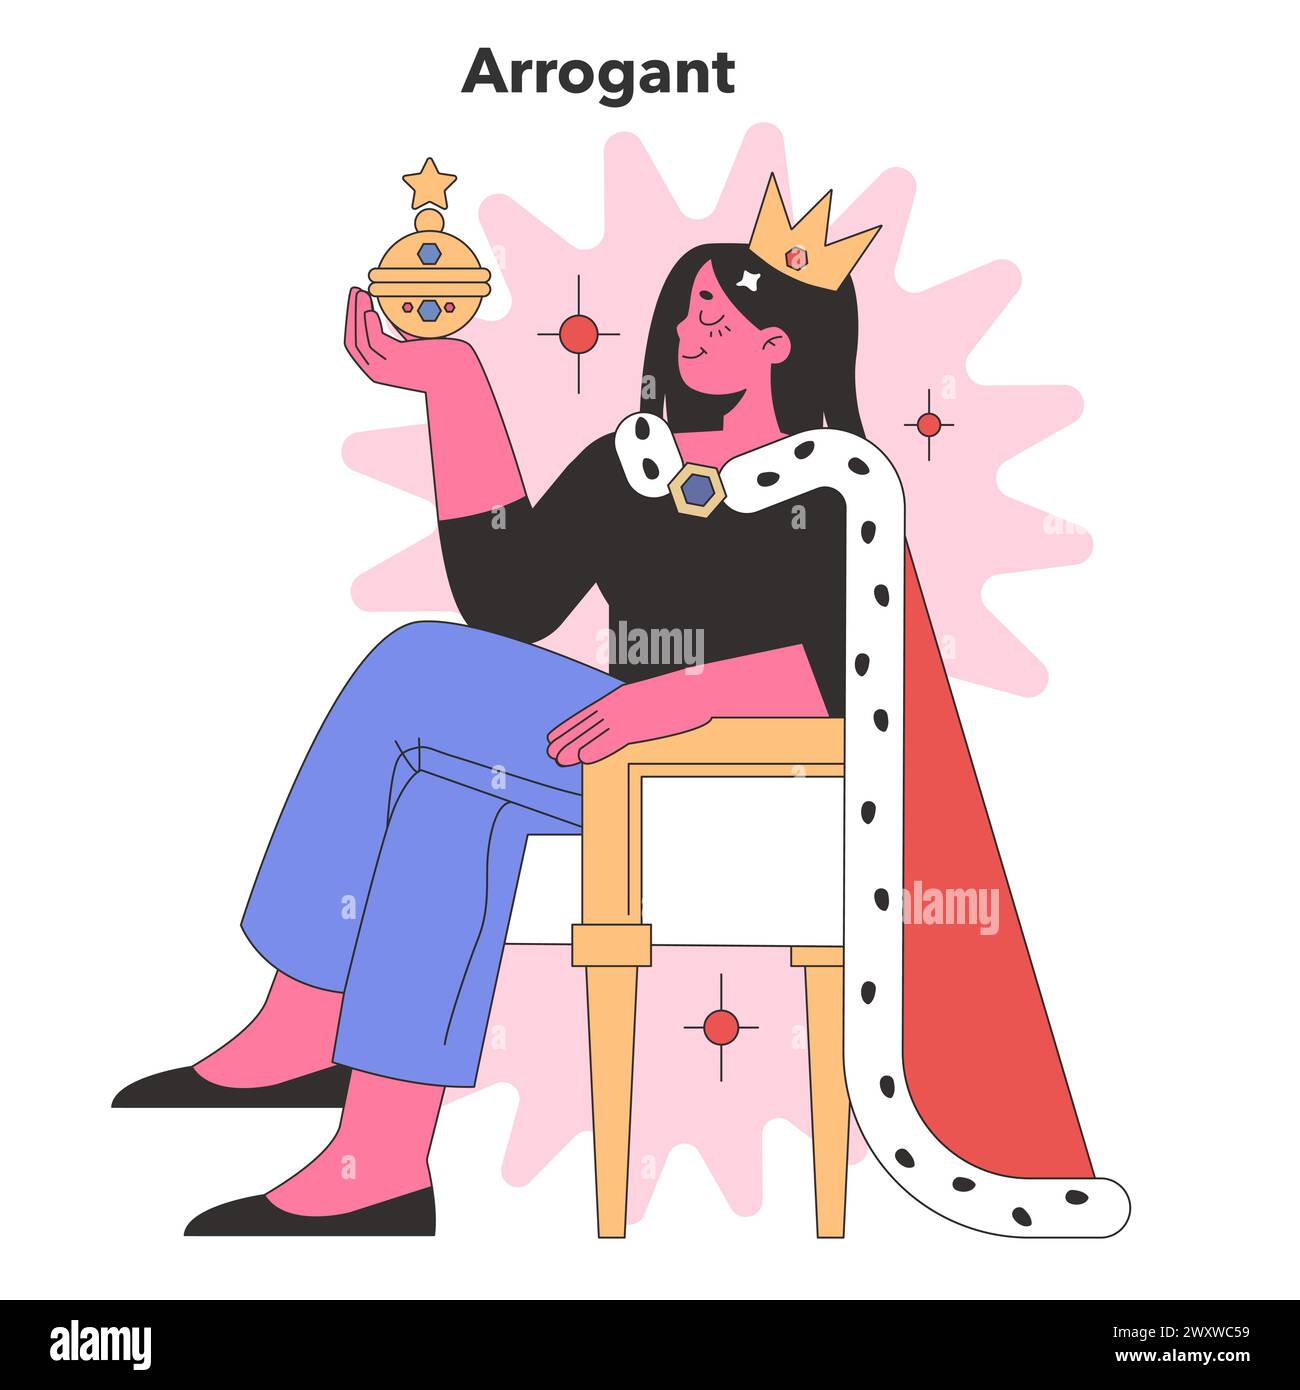 Arrogant Personality depiction. A smug figure with a crown, embodying superiority and self-importance. Flat vector illustration Stock Vector